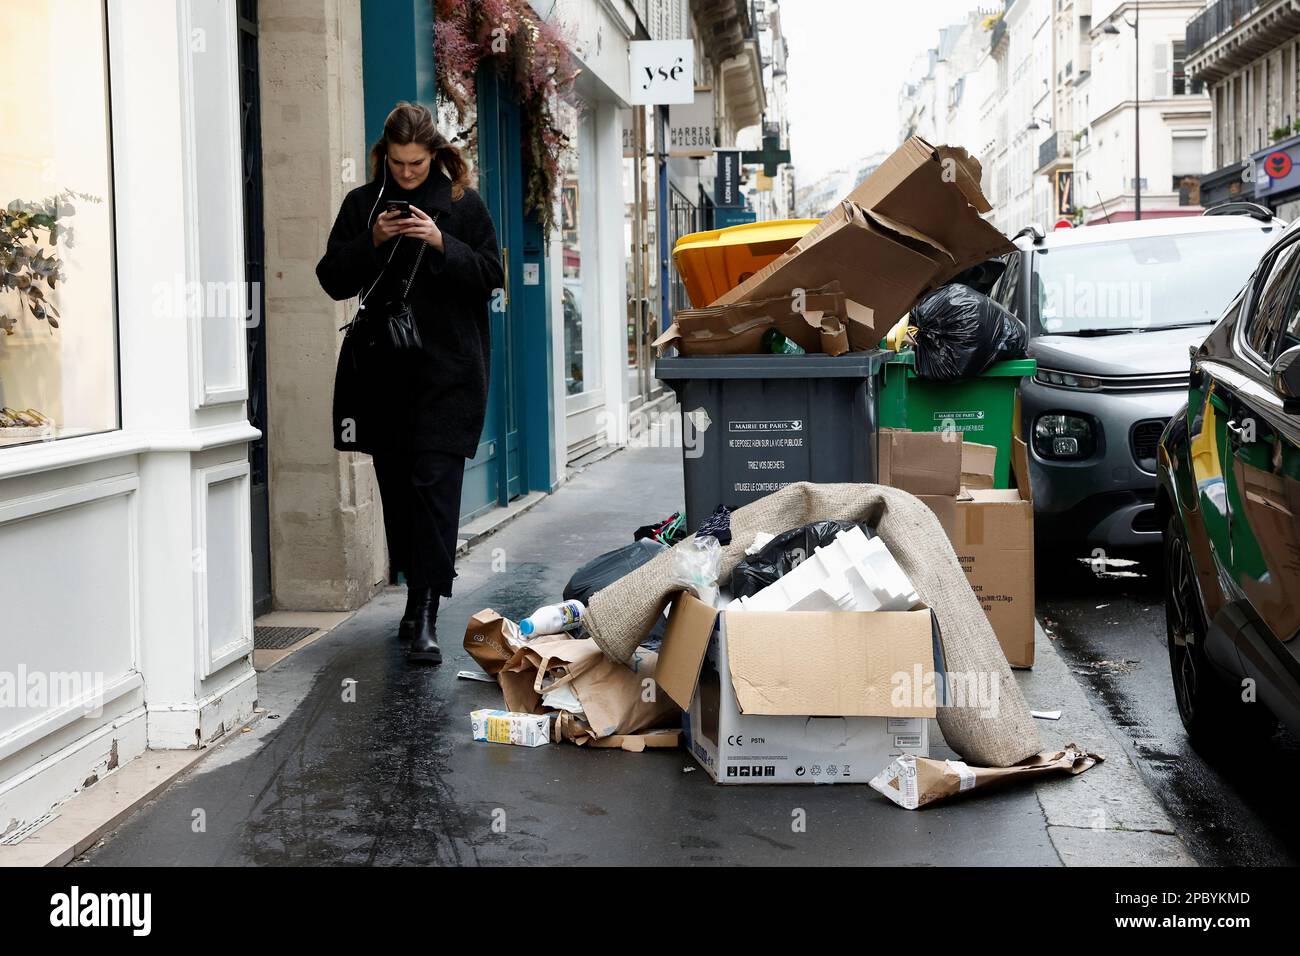 People walk in a street where garbage cans are overflowing, as garbage has not been collected, in Paris, France March 13, 2023. REUTERS/Benoit Tessier Stock Photo